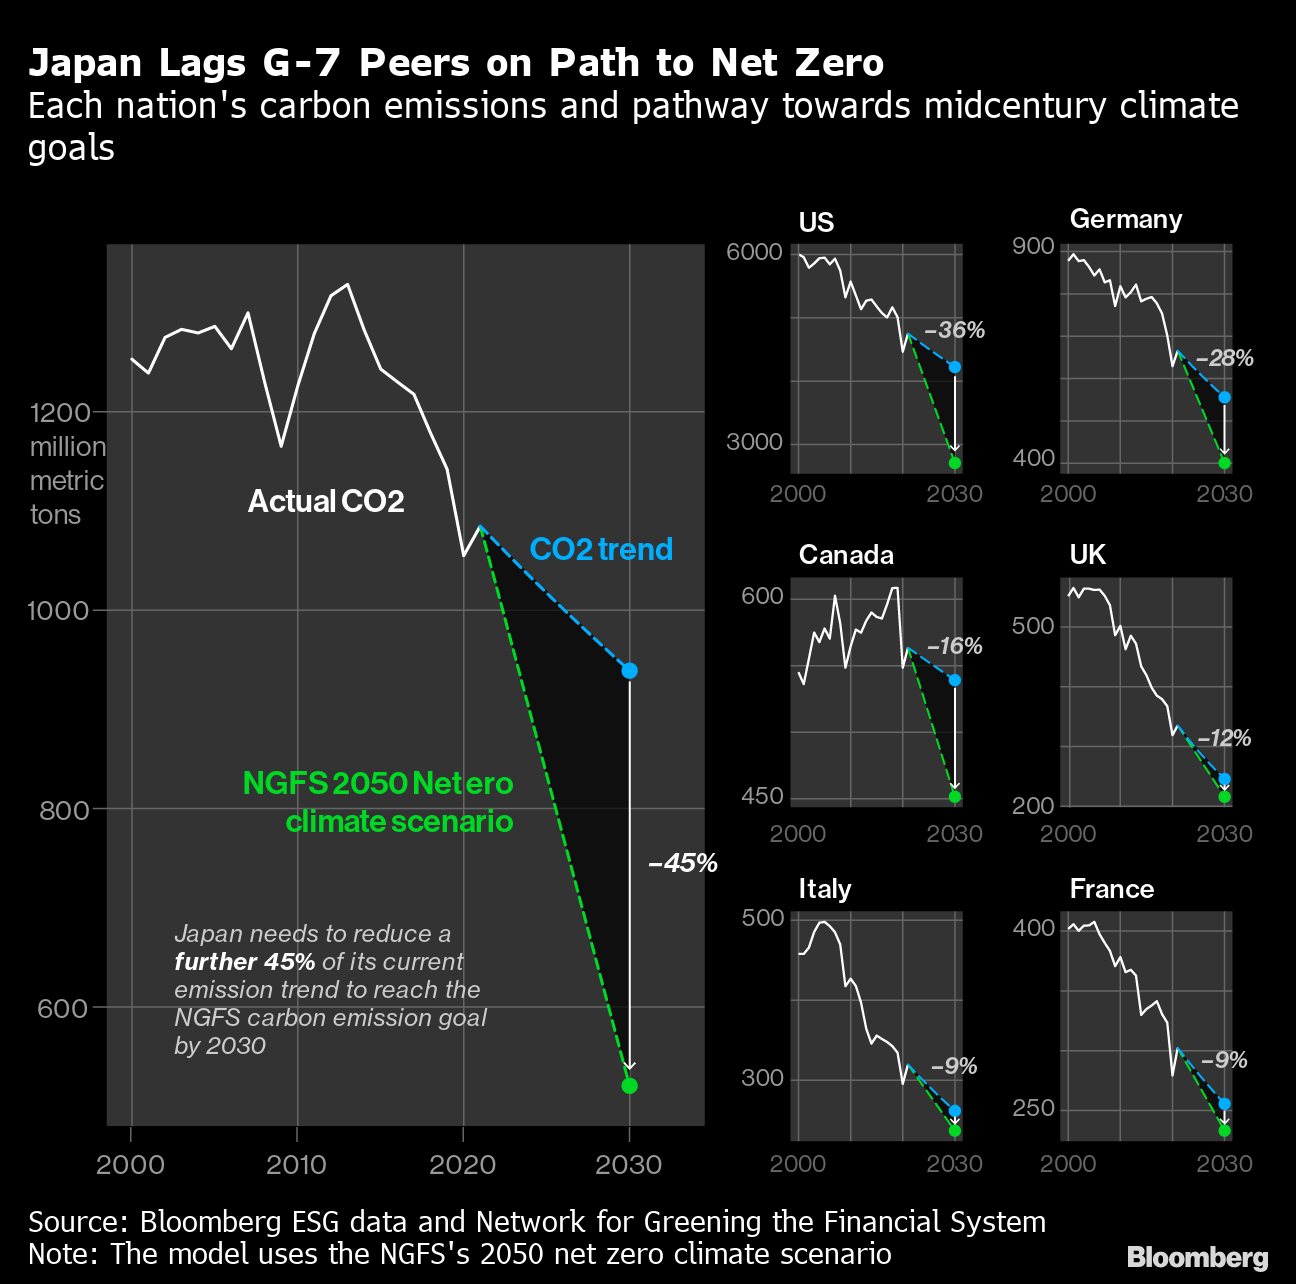 Japan's Emissions Reductions Lag Rest of G-7 Countries - Bloomberg